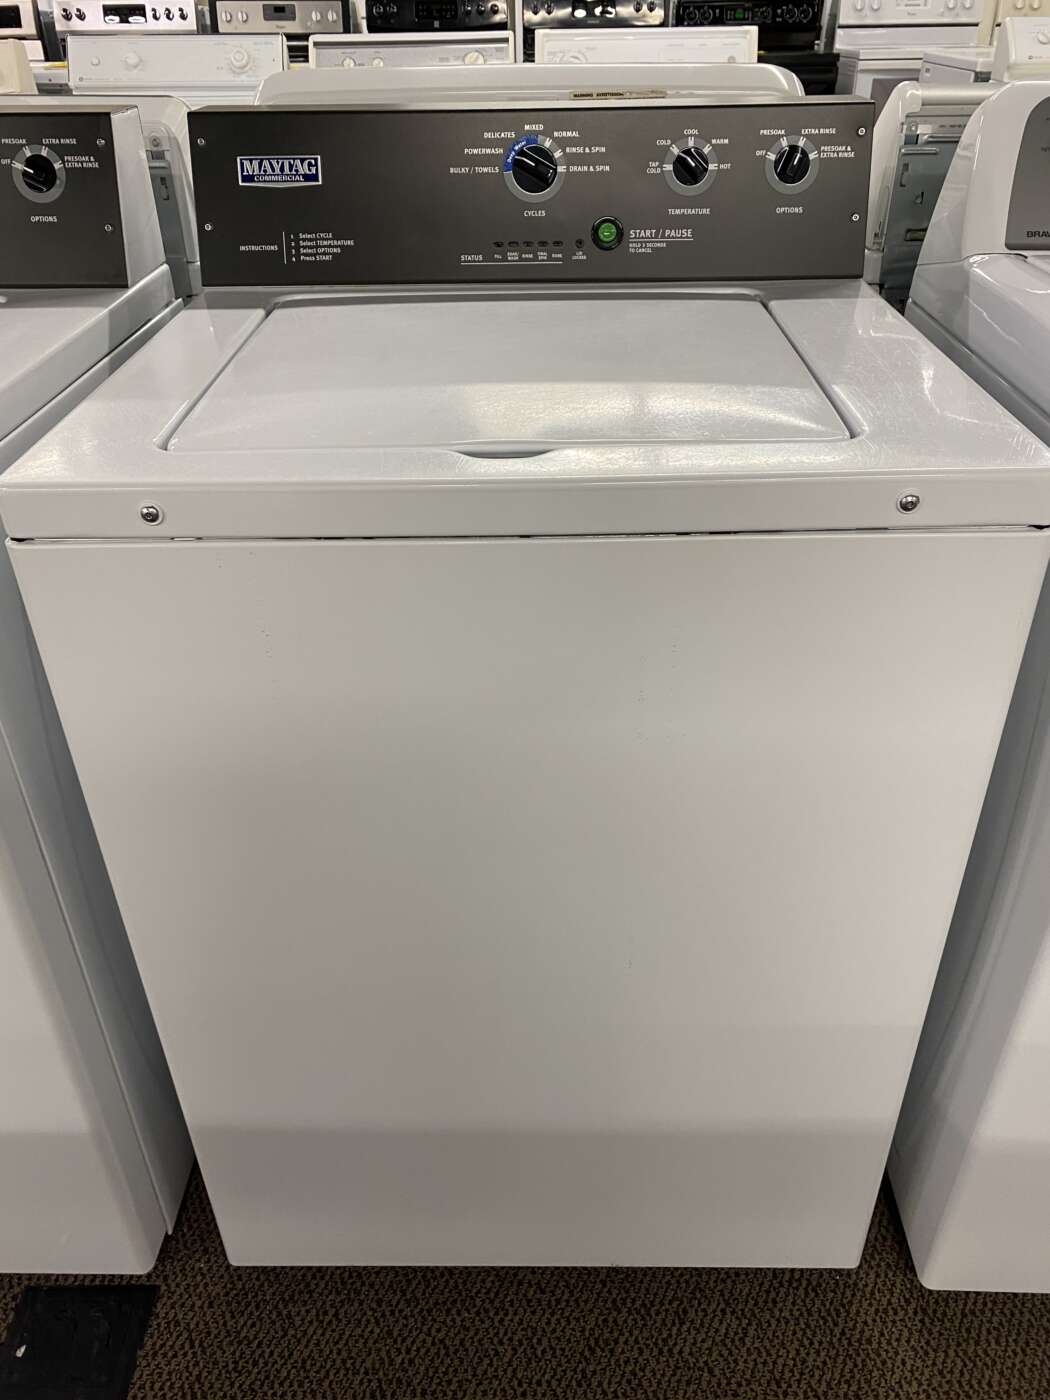 Reconditioned MAYTAG 3.5 Cu. Ft. Top-Load Washer – White